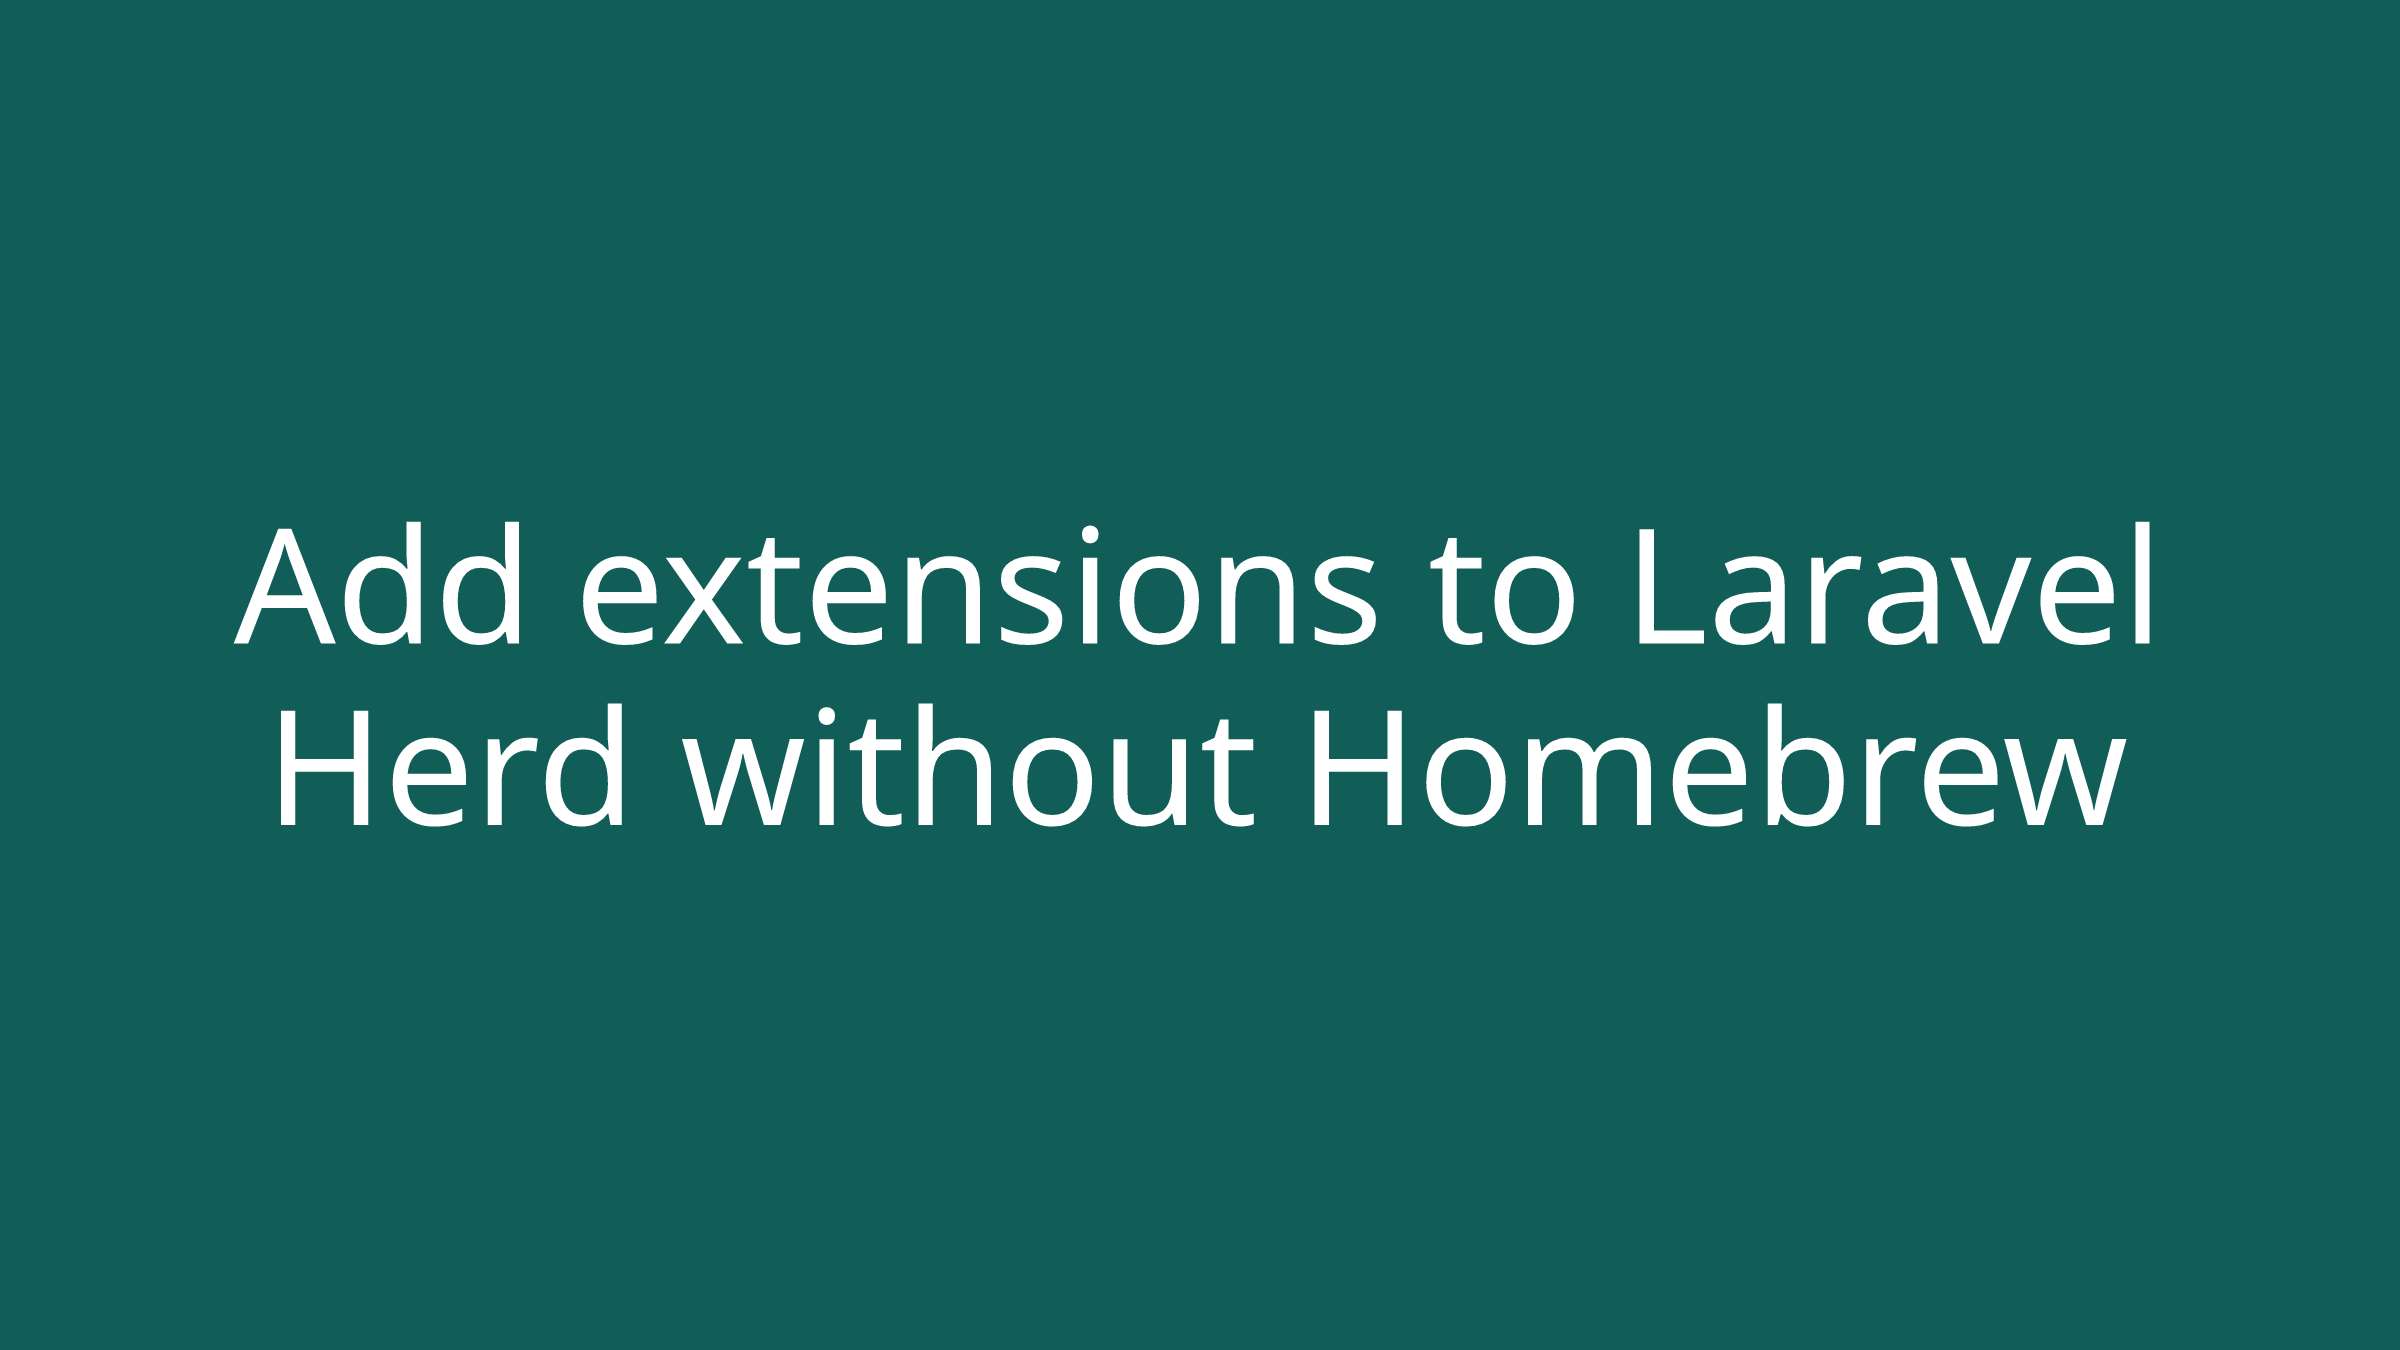 Add extensions to Laravel Herd without Homebrew